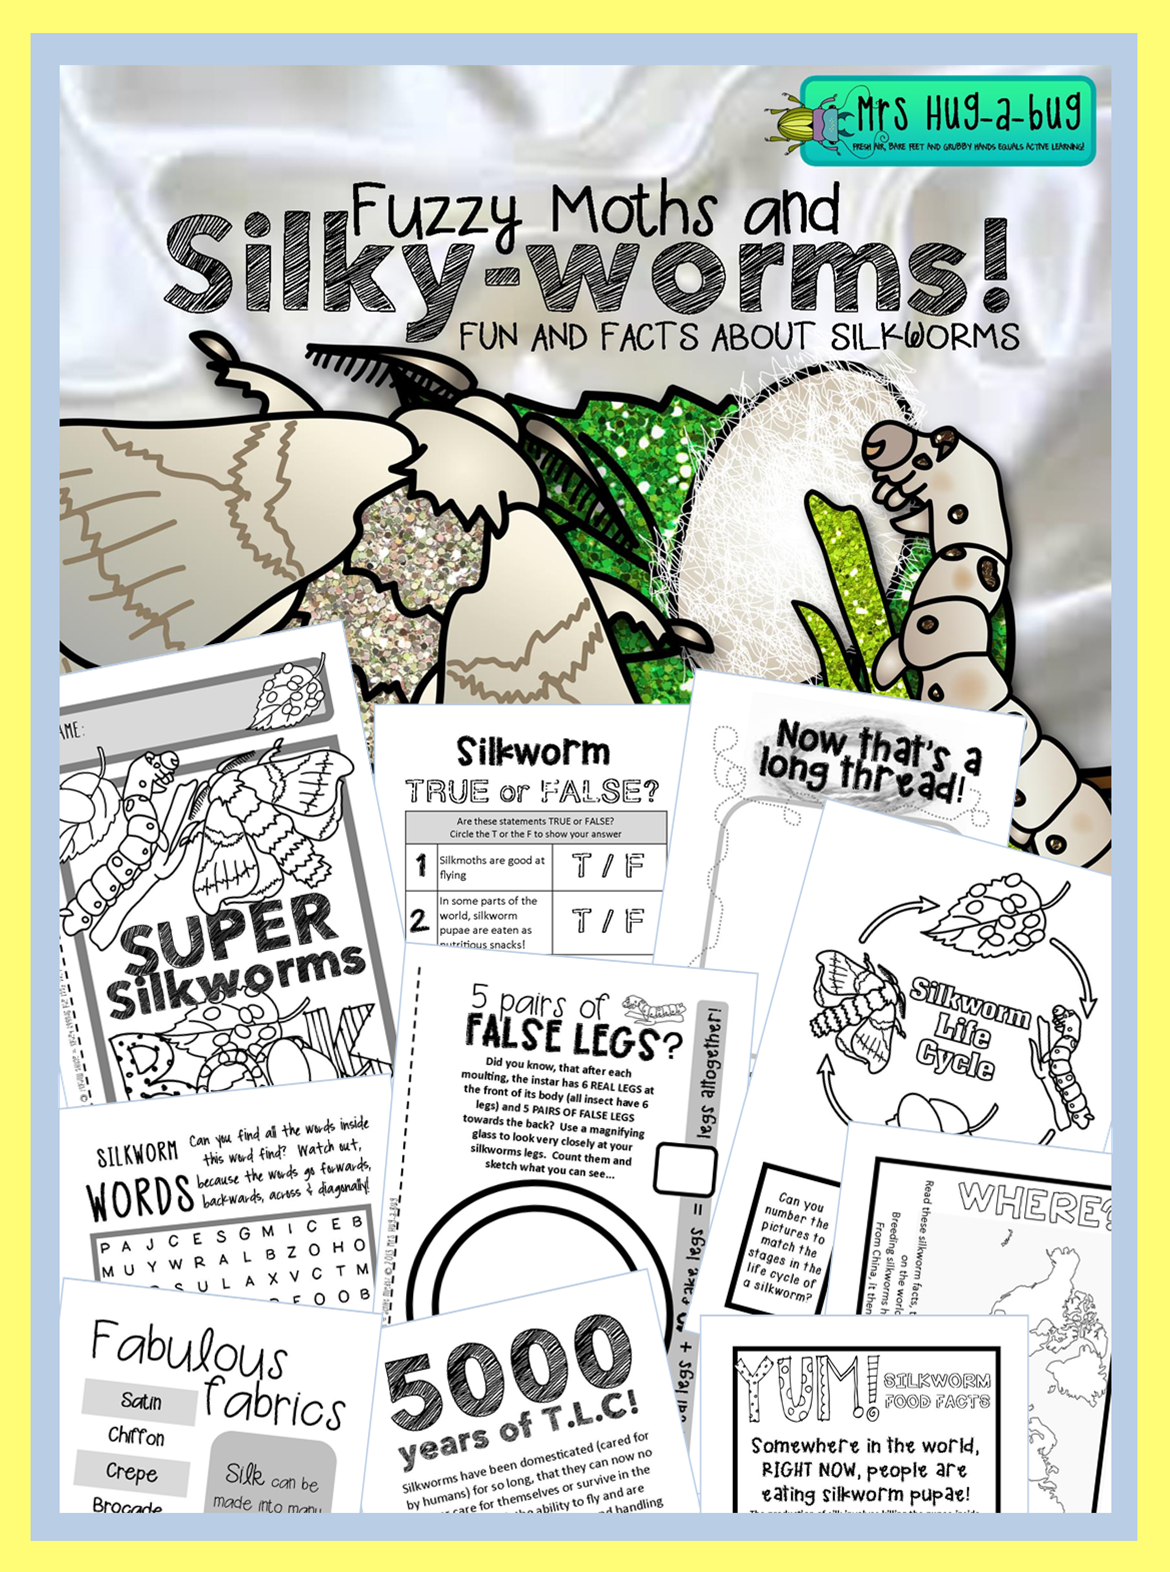 Top 5 coolest facts about…….SILKWORMS! {+Free printable}